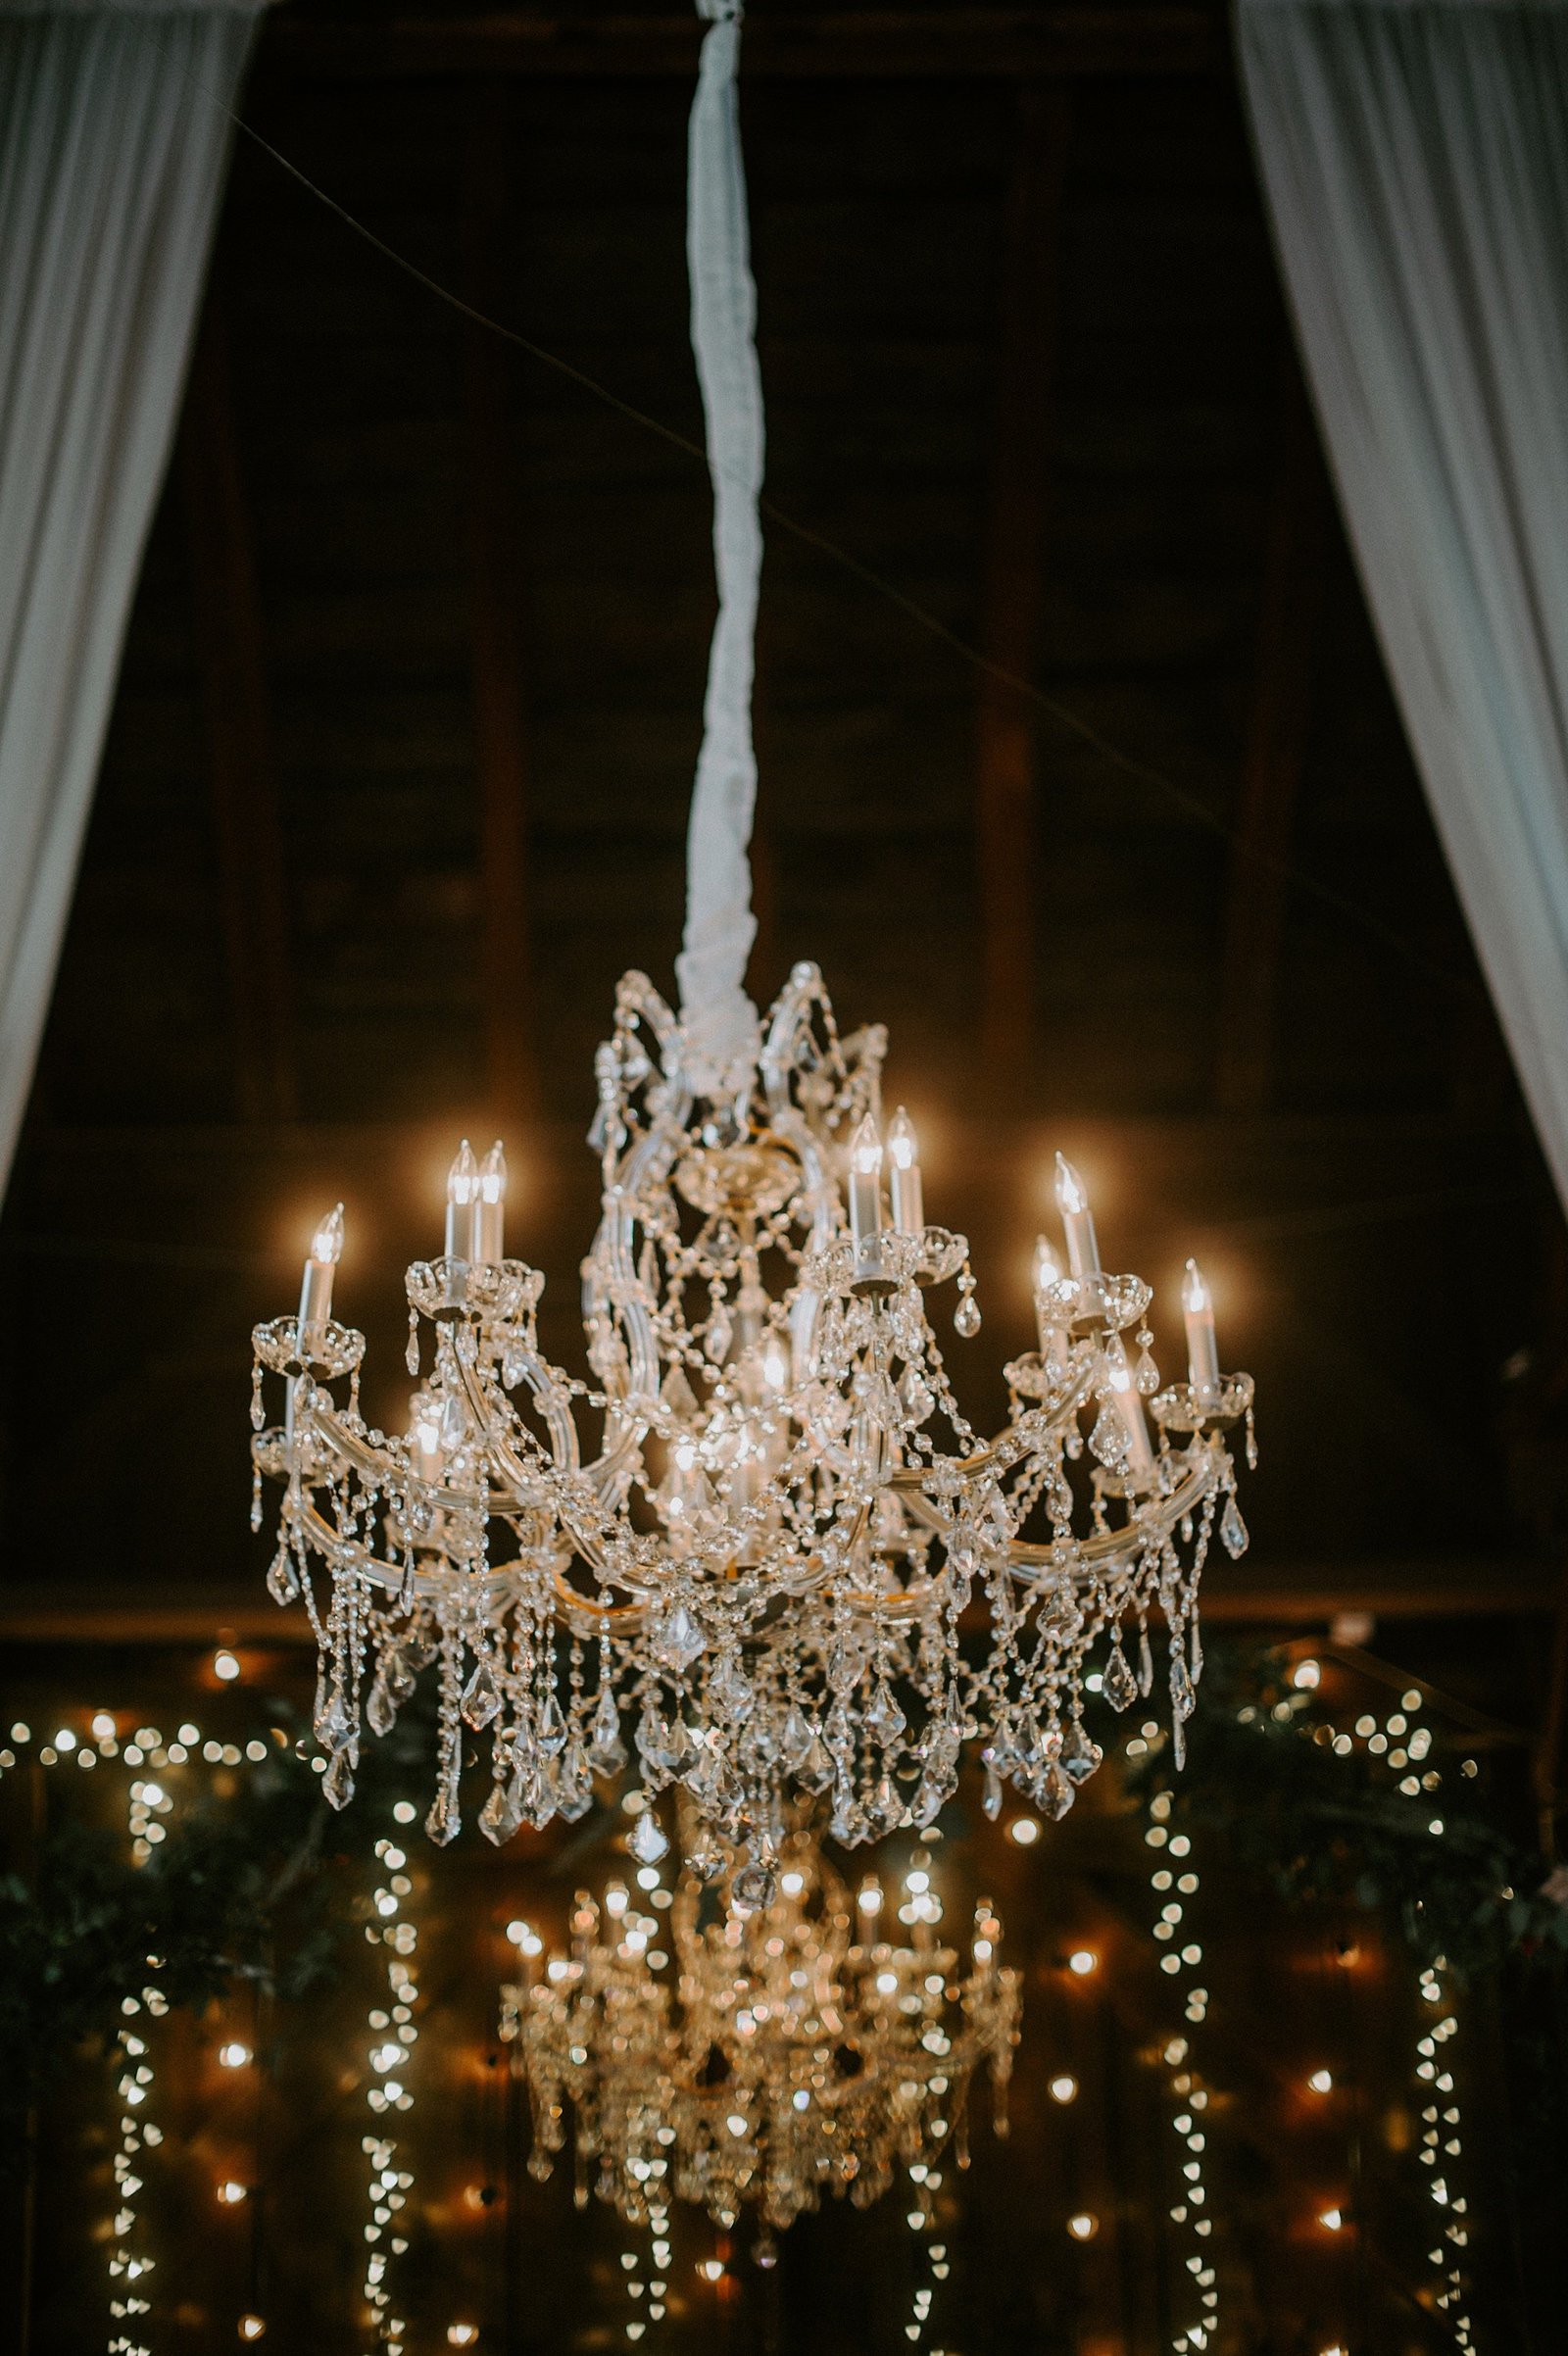 Rustic & romantic wedding at The Webb Barn with draping and chandeliers in Wethersfield, CT